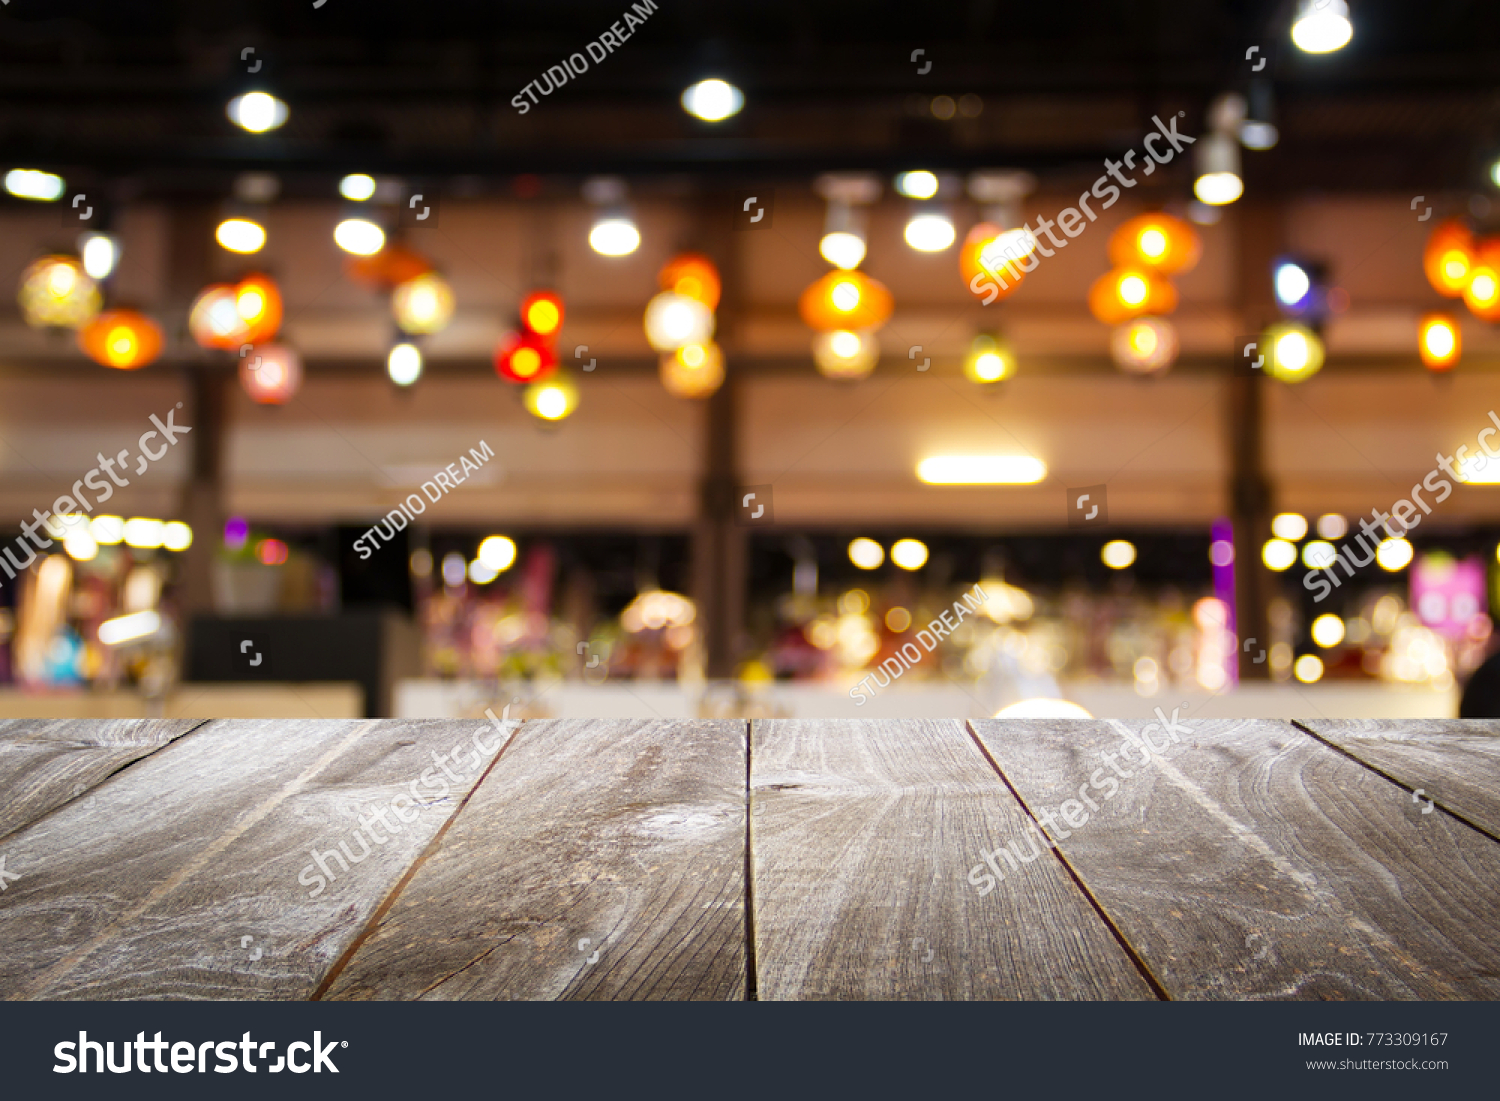 wooden table for placing products with a beautiful night restaurant backdrop, Space for placing items on the table, product and food display. #773309167